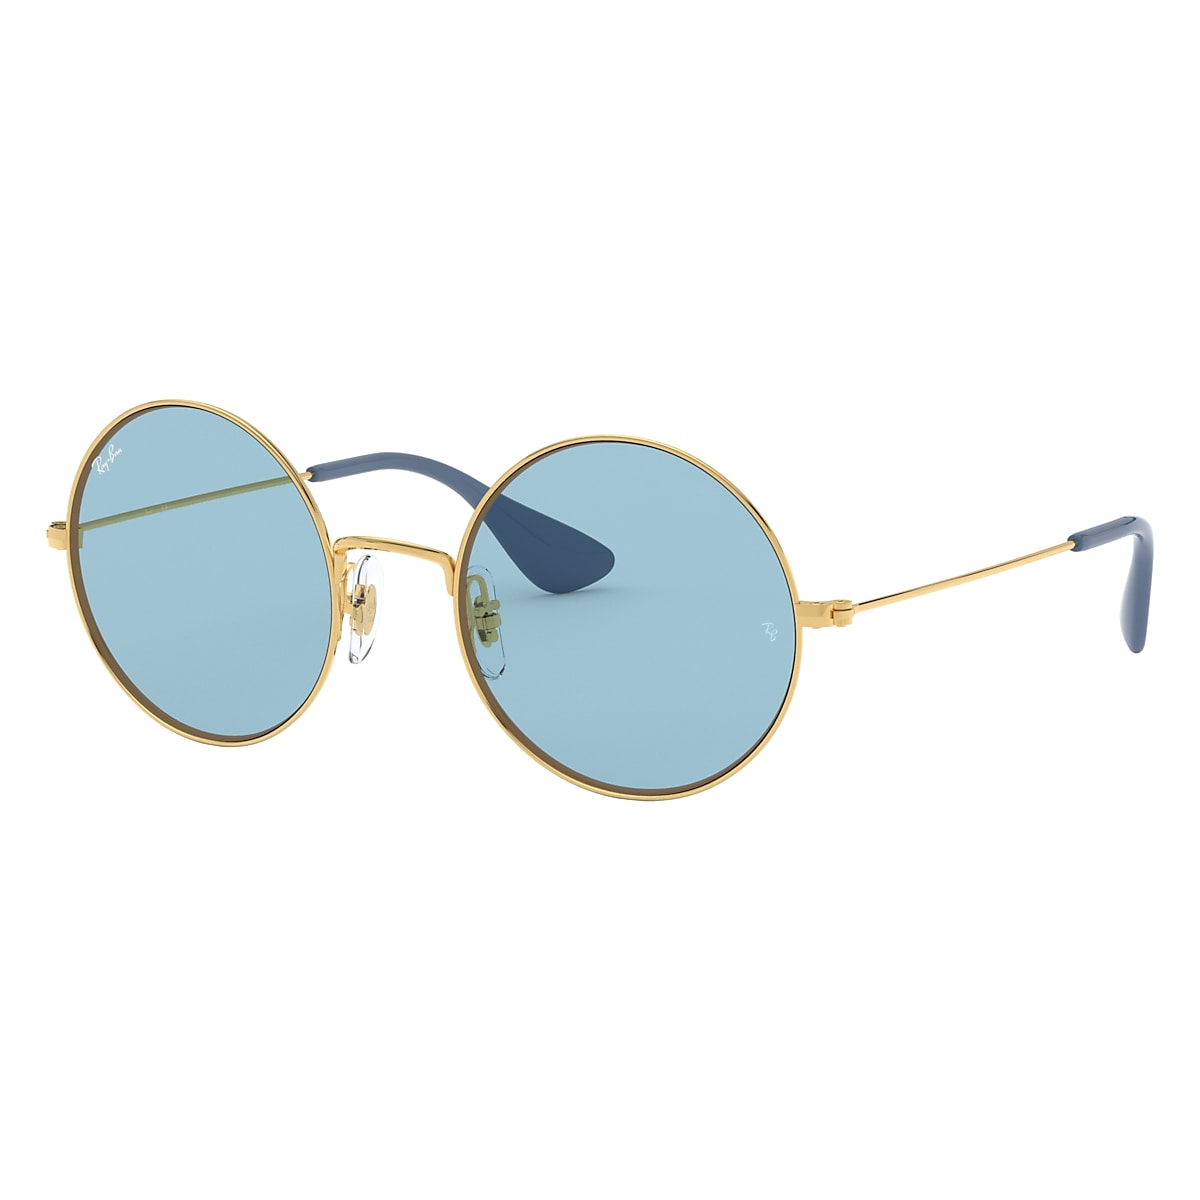 JA-JO Sunglasses in Gold and Light Blue - RB3592 | Ray-Ban® US